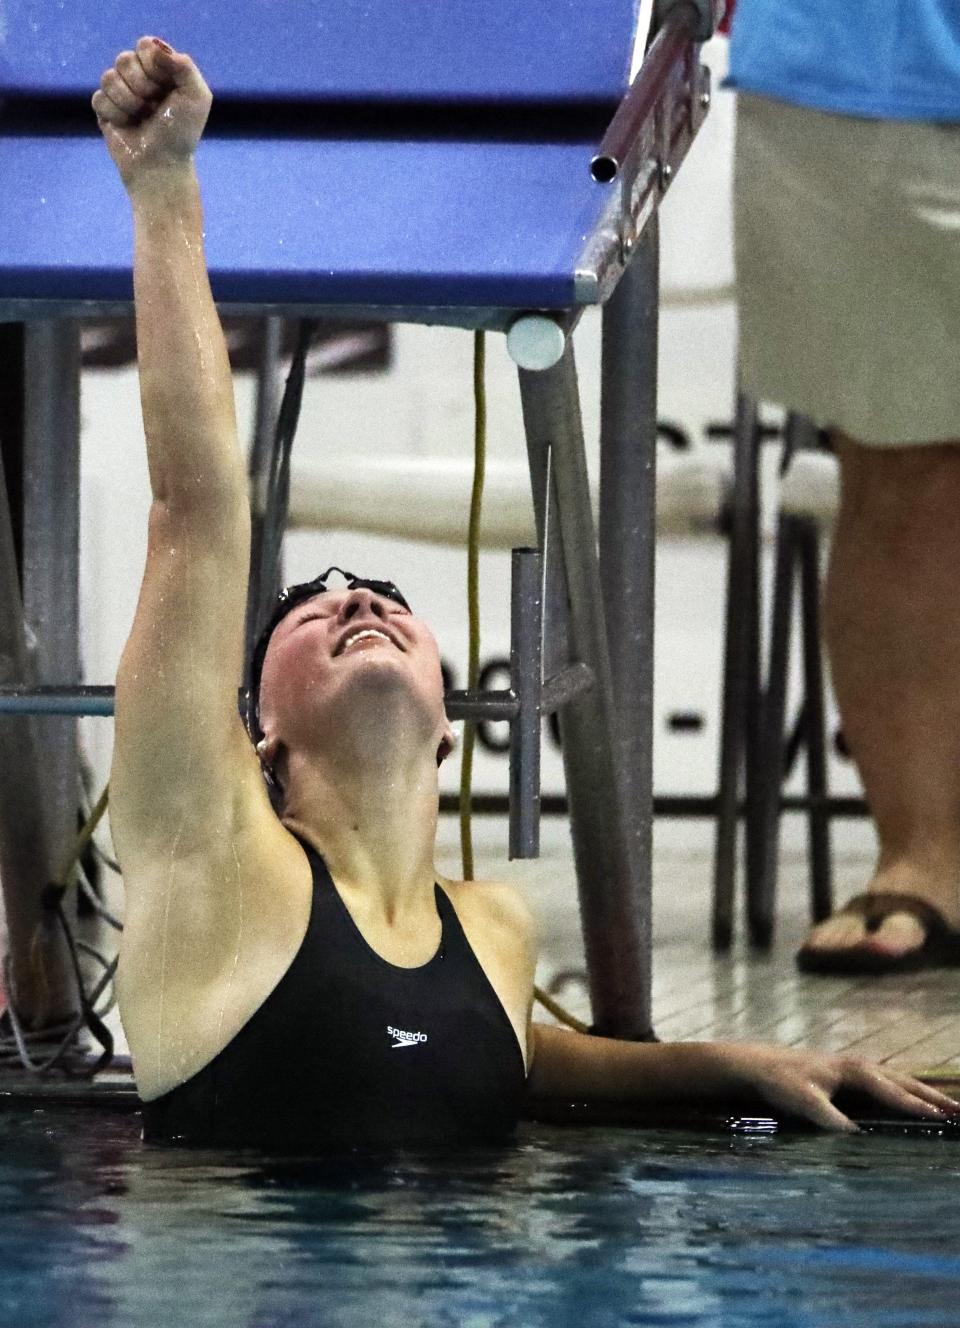 Johnston senior and Iowa commit Olivia Swalley is the Register's girls swimmer and diver of the year winner for 2022. Swalley set a state record in the 200-yard IM and also three-peated in the 100 backstroke during the 2022 girls state swimming and diving meet held Nov. 11-12 in Marshalltown.